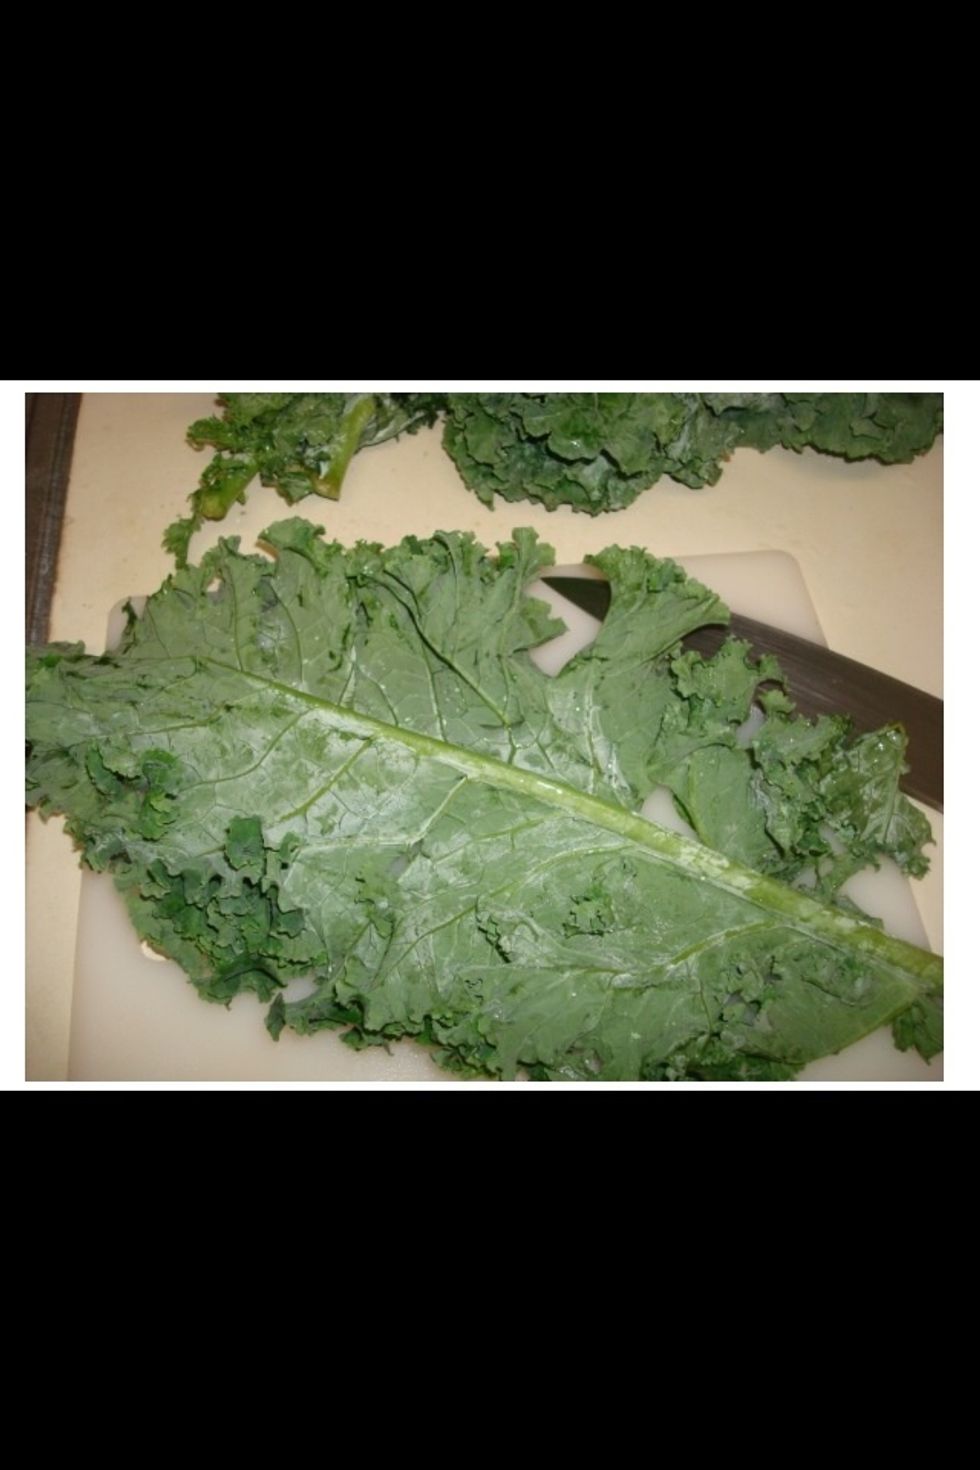 Note the rib down the center of the kale.  We will be removing and discarding this portion.